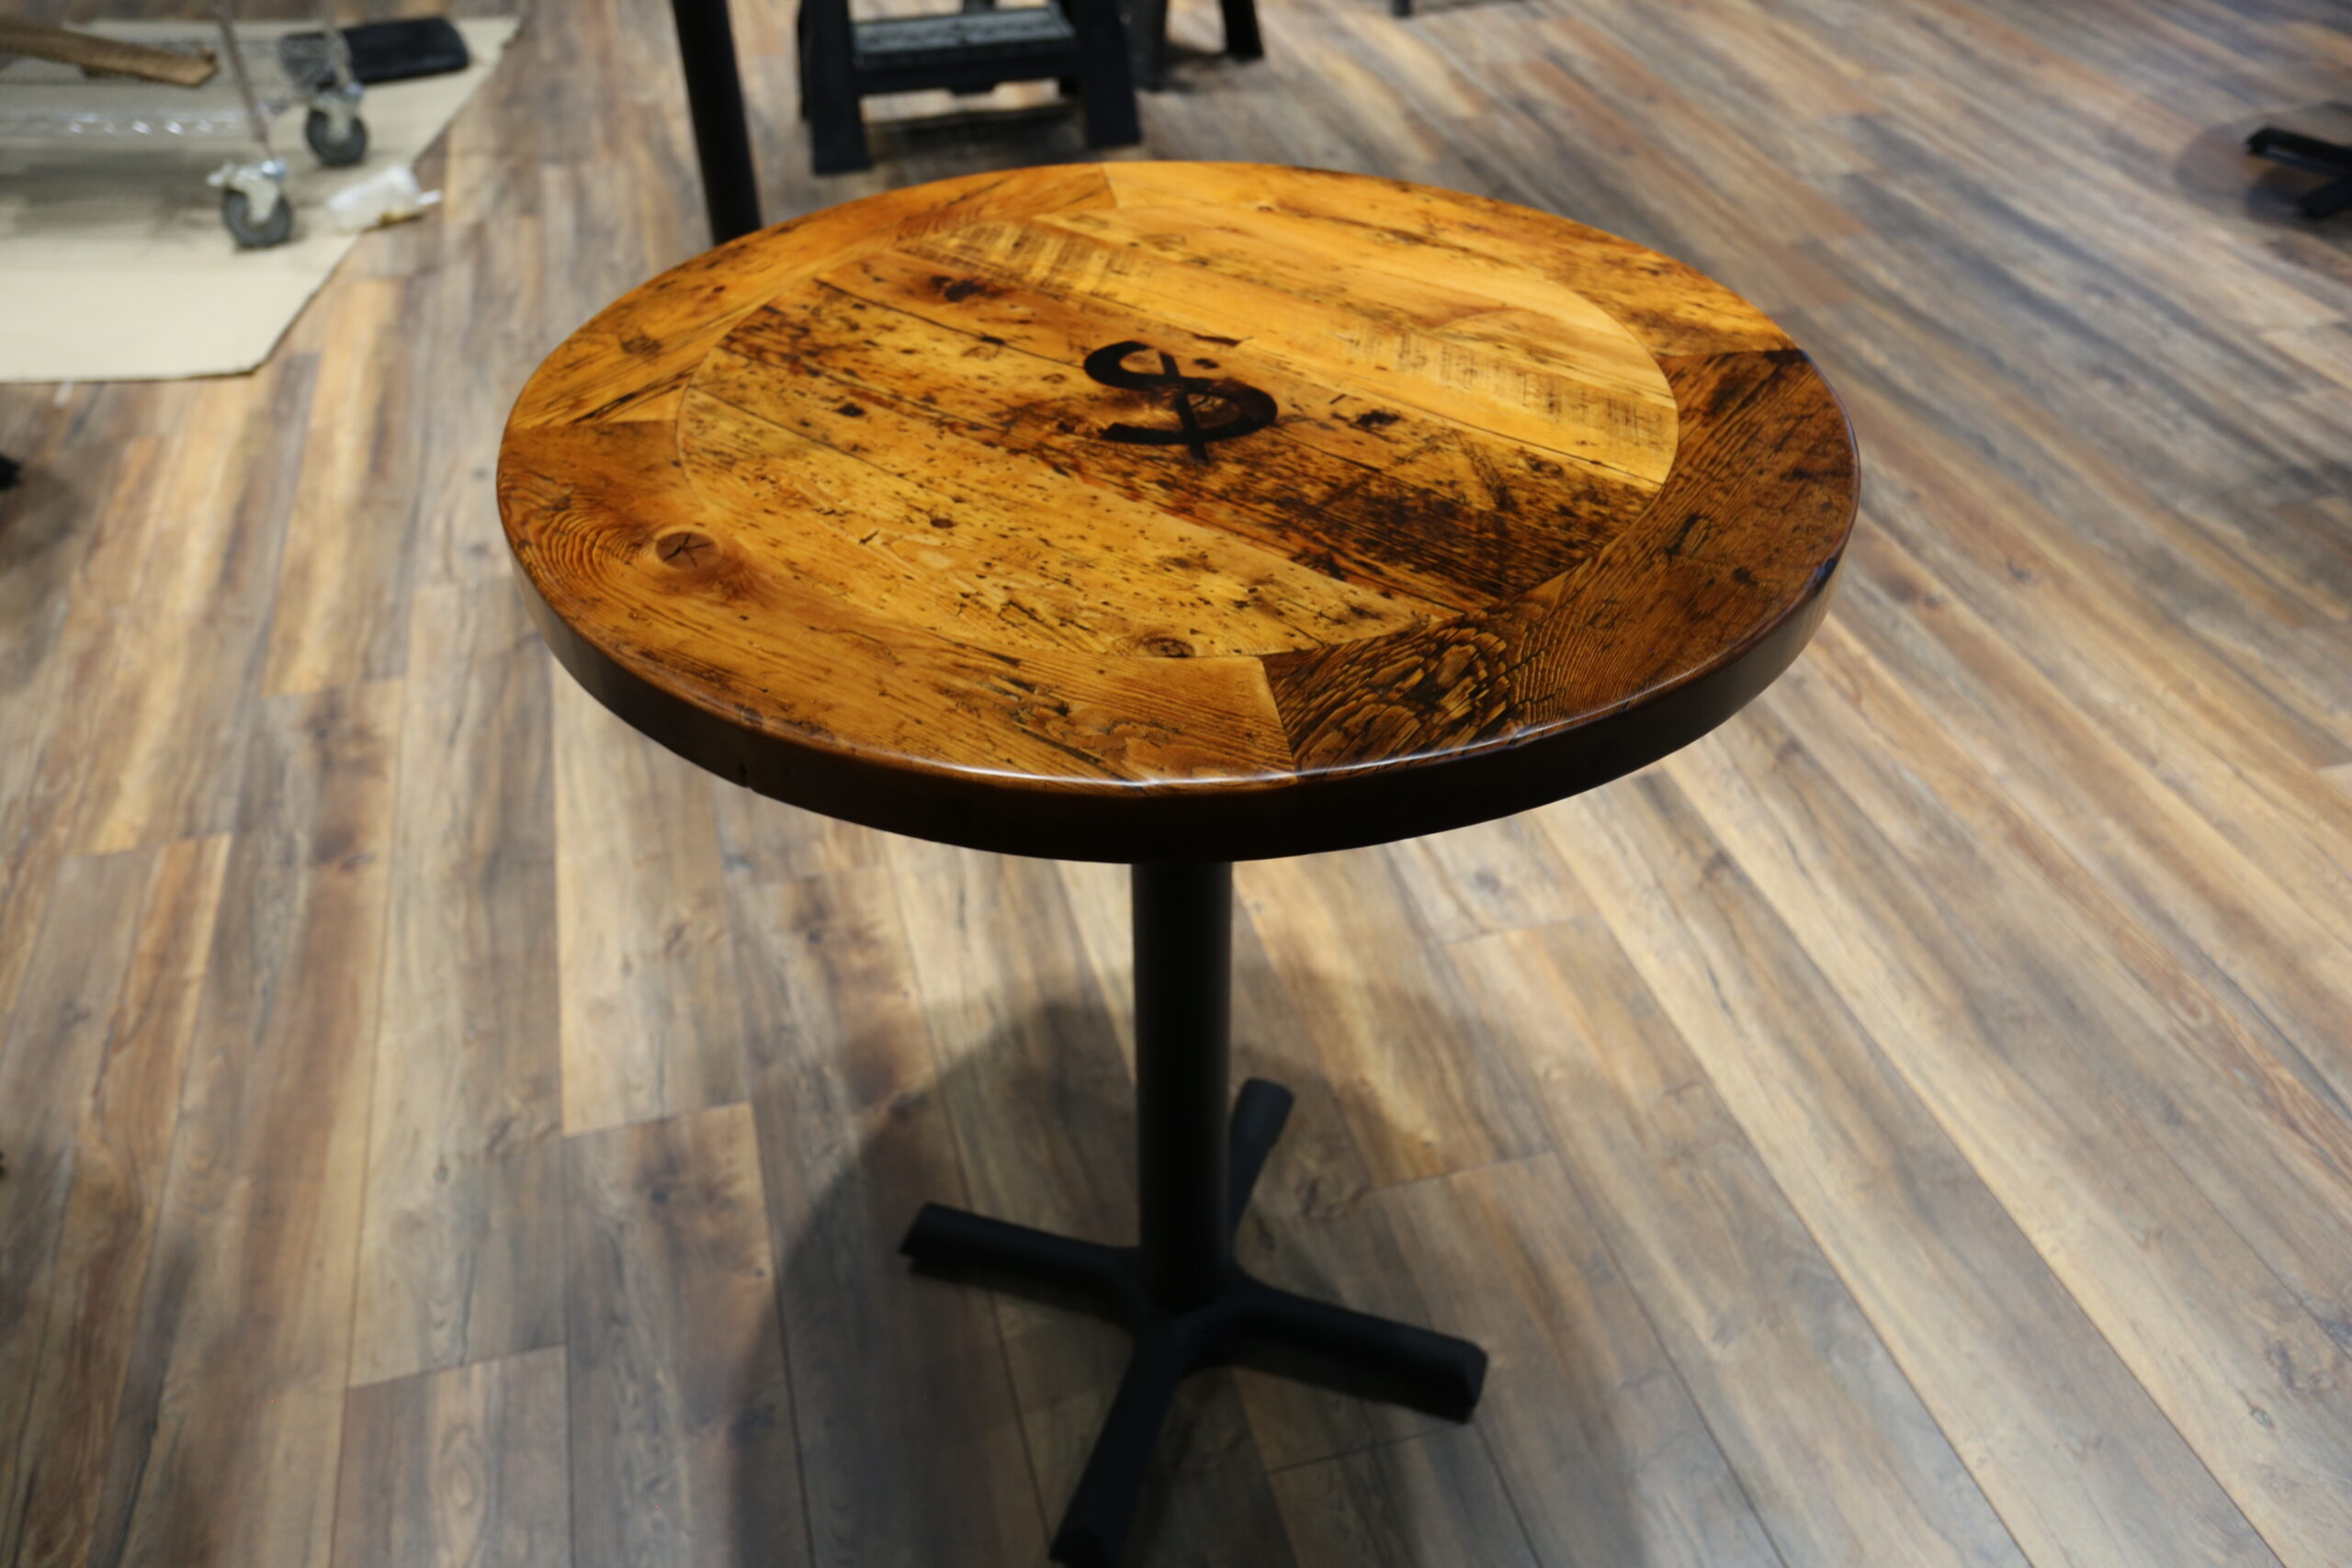 [Ontario Barnwood] Event Tables we made for a Burlington, Ontario Business â€“ Matte Black Metal Bases [provided by Ontario Table & Chair in Waterloo] â€“ Custom branding iron [provide by Summit Laser in Salem] - 2â€ Old Growth Reclaimed Hemlock Threshing Floor Construction Tops â€“ Original distressing & character maintained - Premium epoxy + satin polyurethane finish â€“ www.table.ca